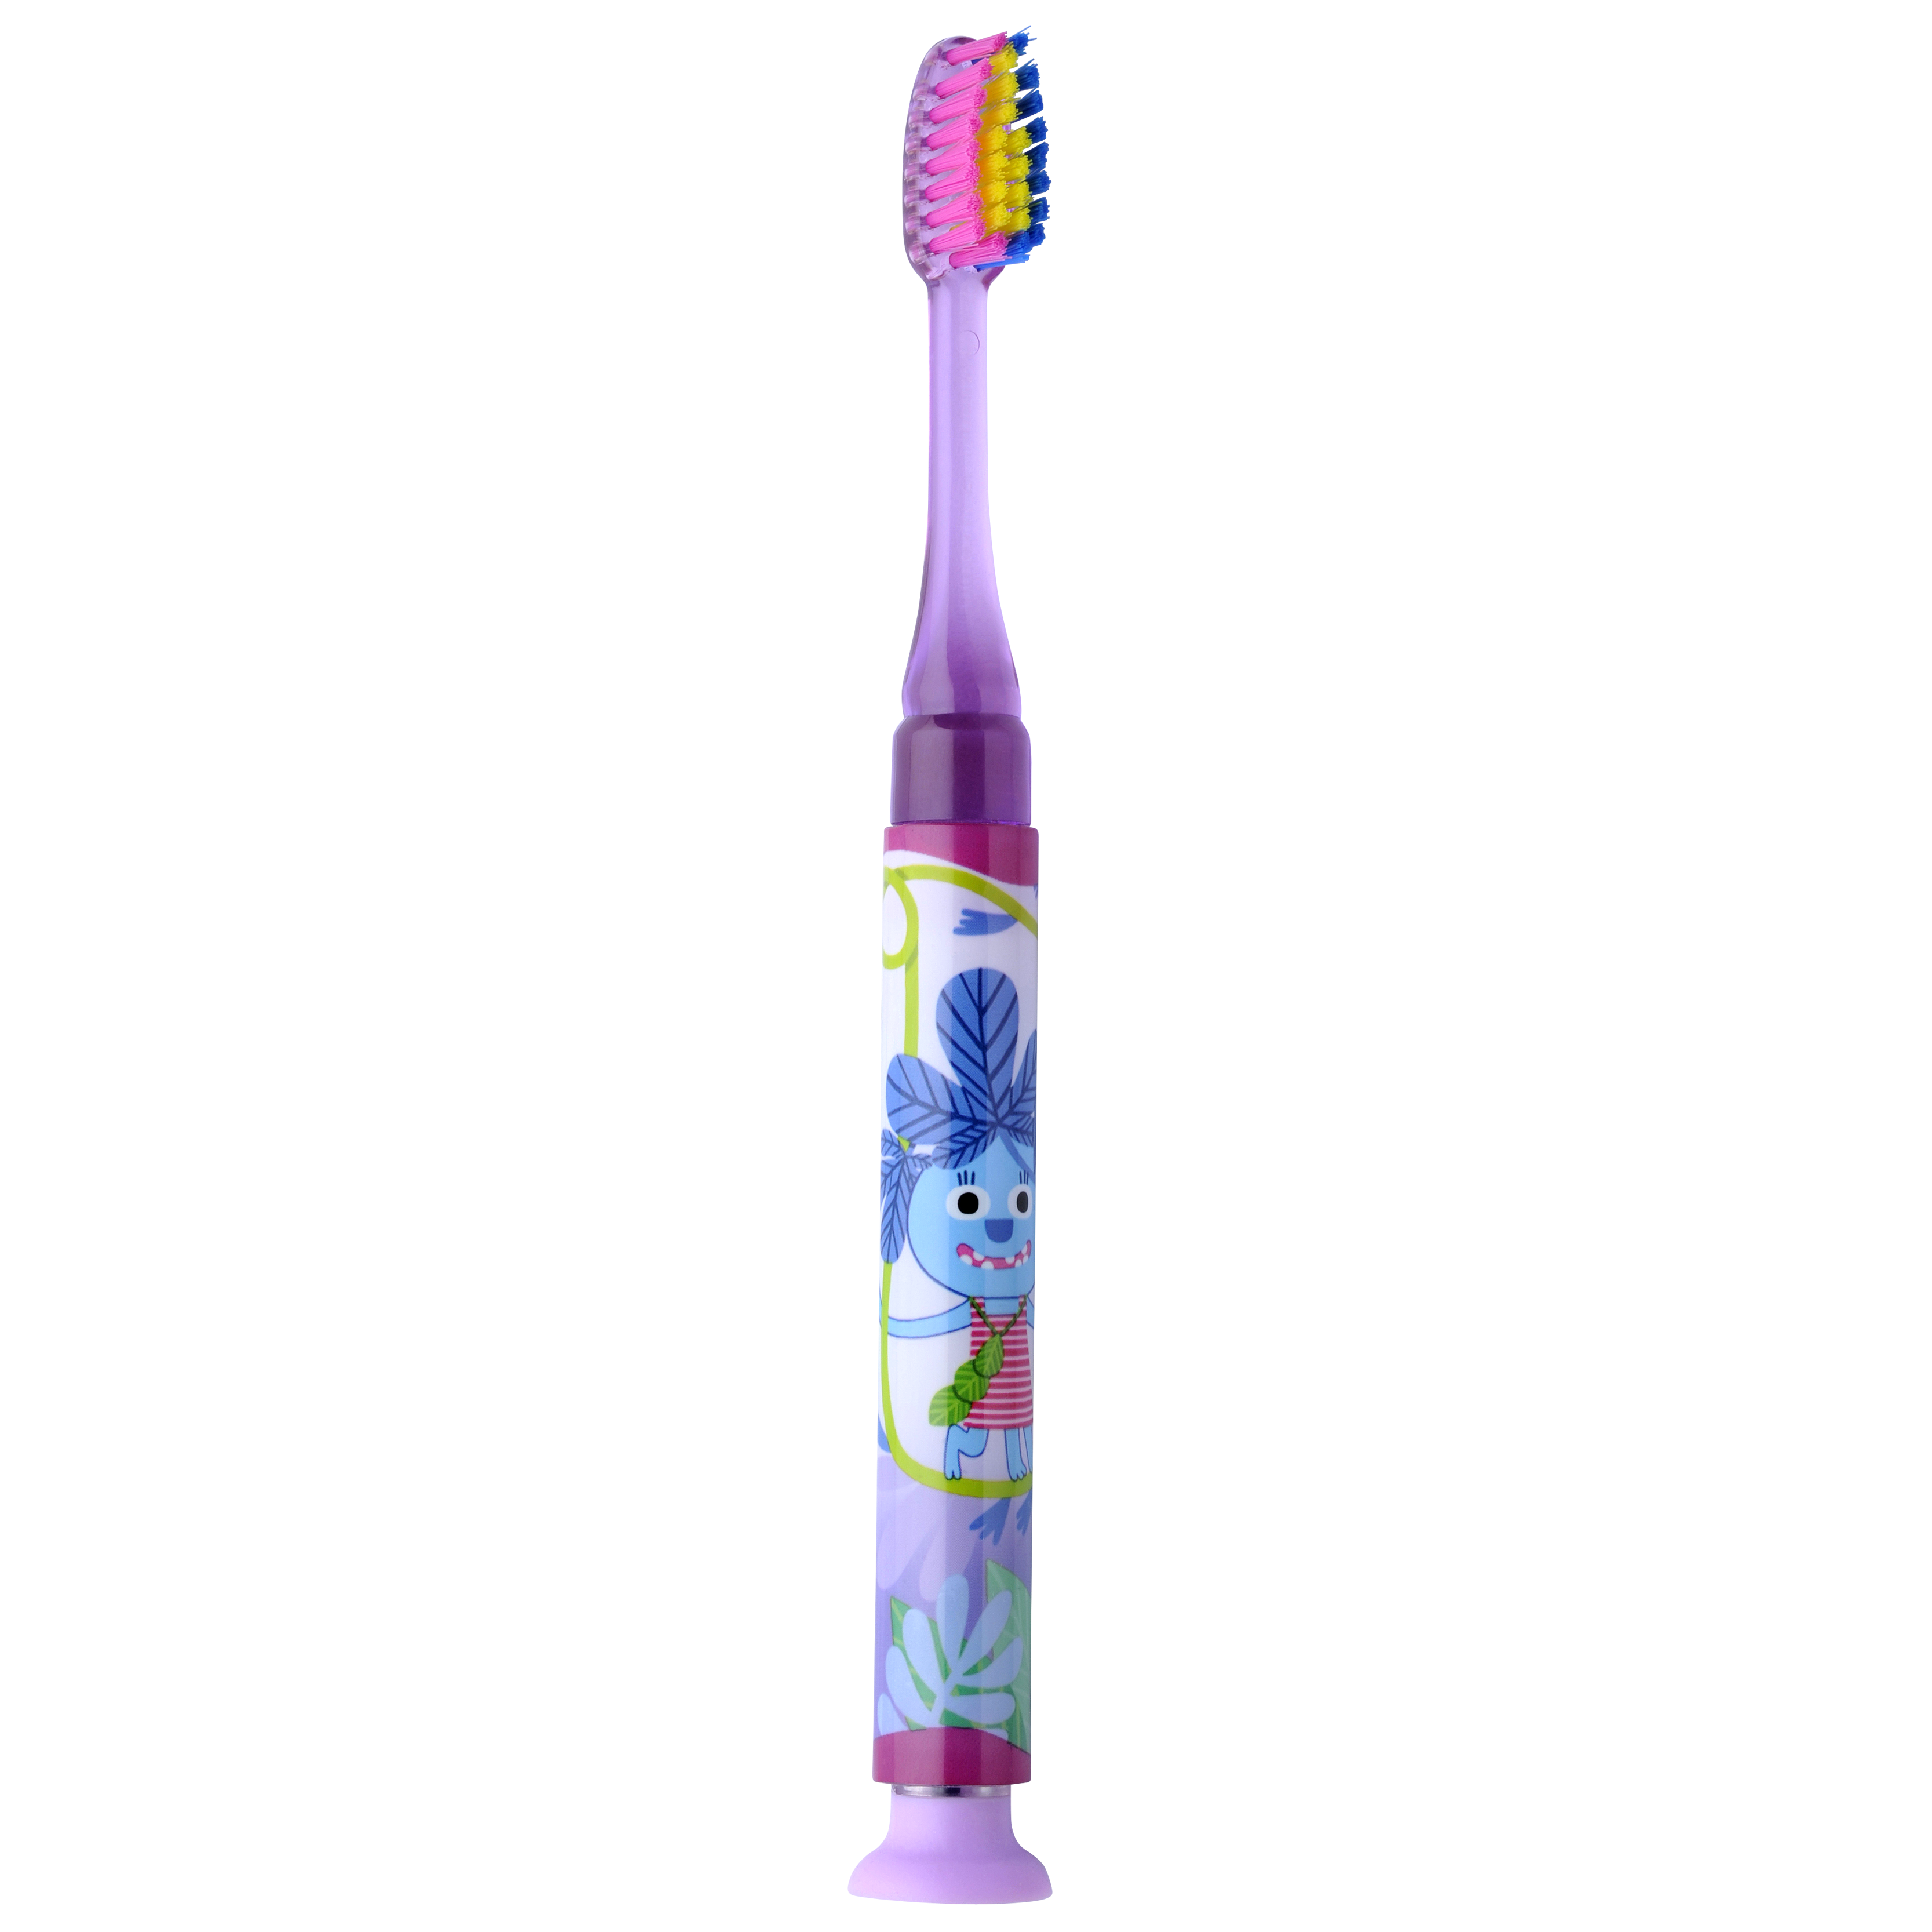 P903-GUM-Junior-Light-Up-Toothbrush-Purple-Naked-Left-Angle.png